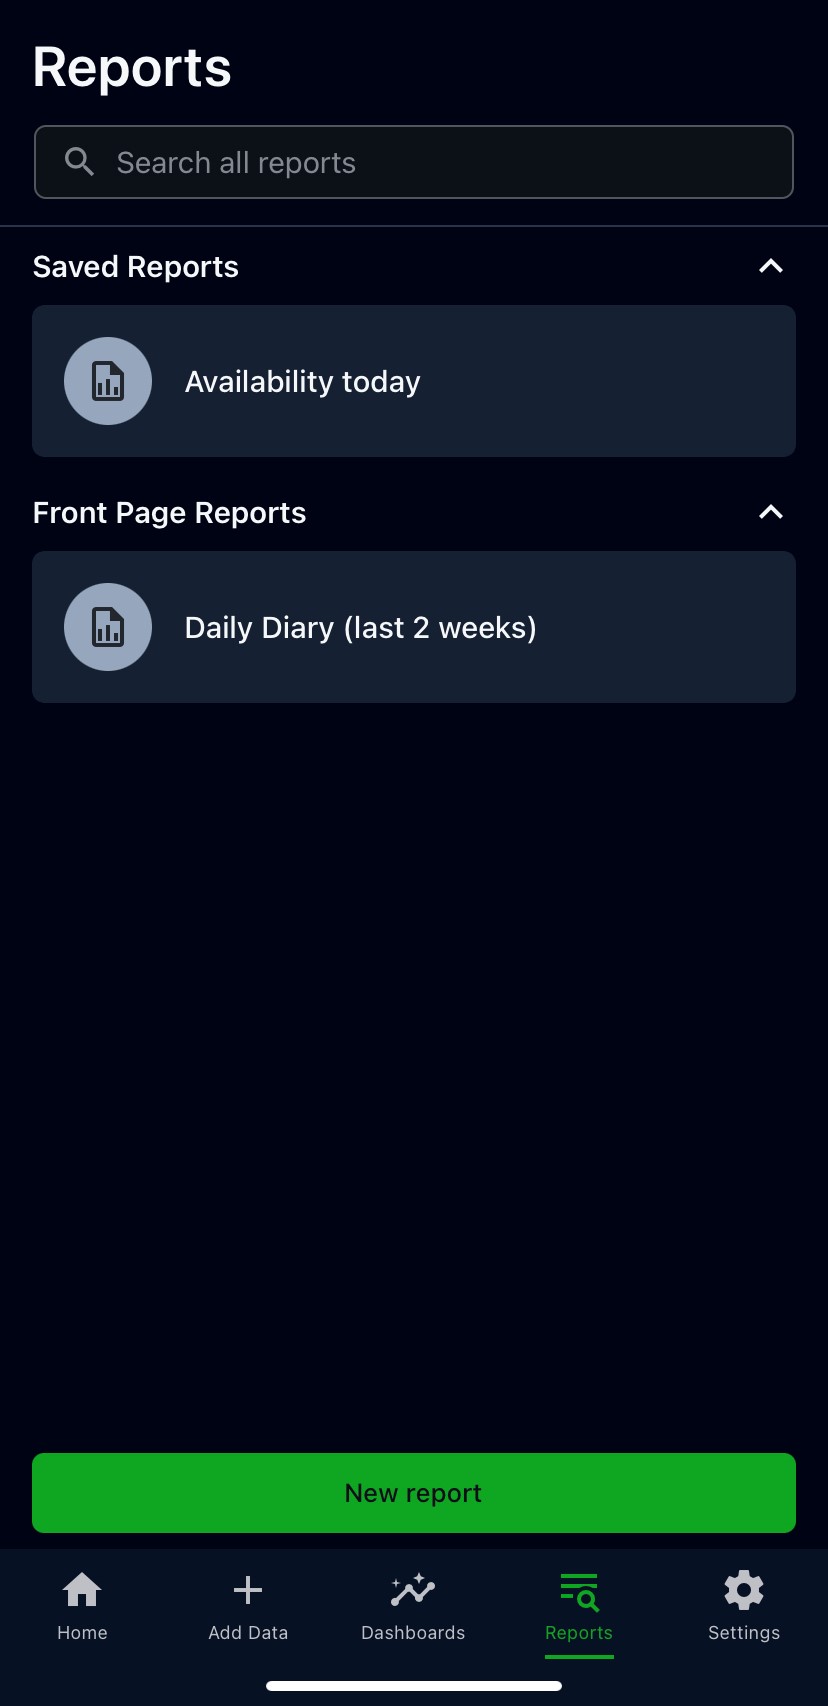 A screenshot of the Reports tab in the Smartabase app.